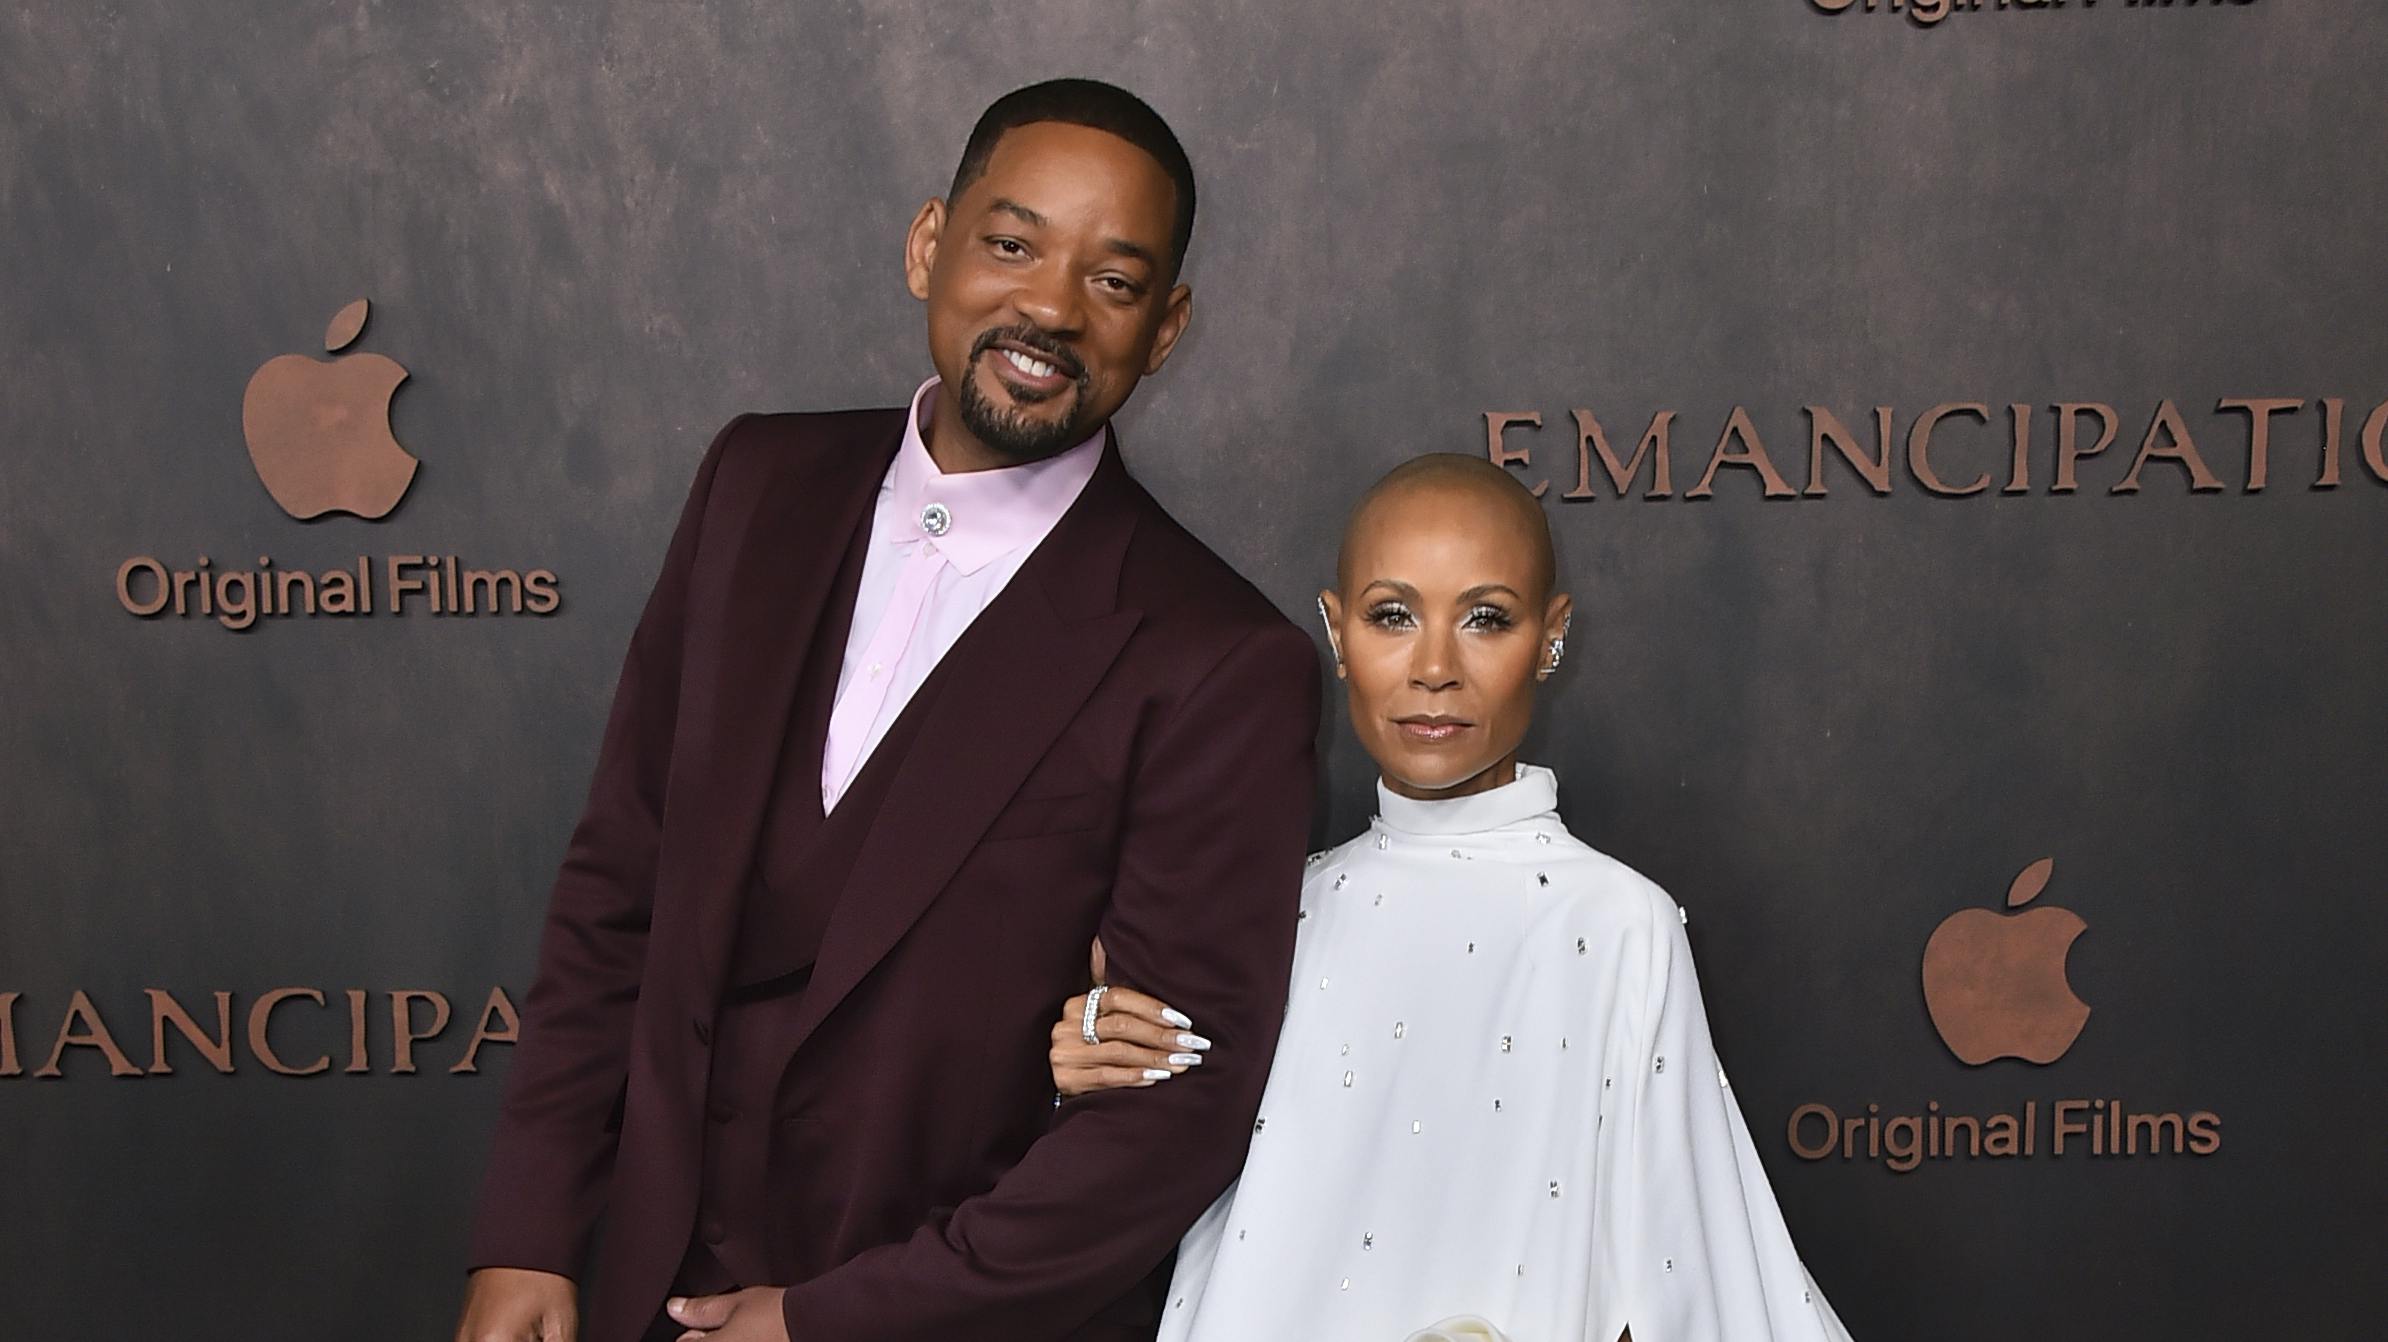 Will Smith, left, and Jada Pinkett Smith arrive at the premiere of "Emancipation, " Wednesday, Nov. 30, 2022, at the Regency Village Theatre in Los Angeles. (Photo by Jordan Strauss/Invision/AP)